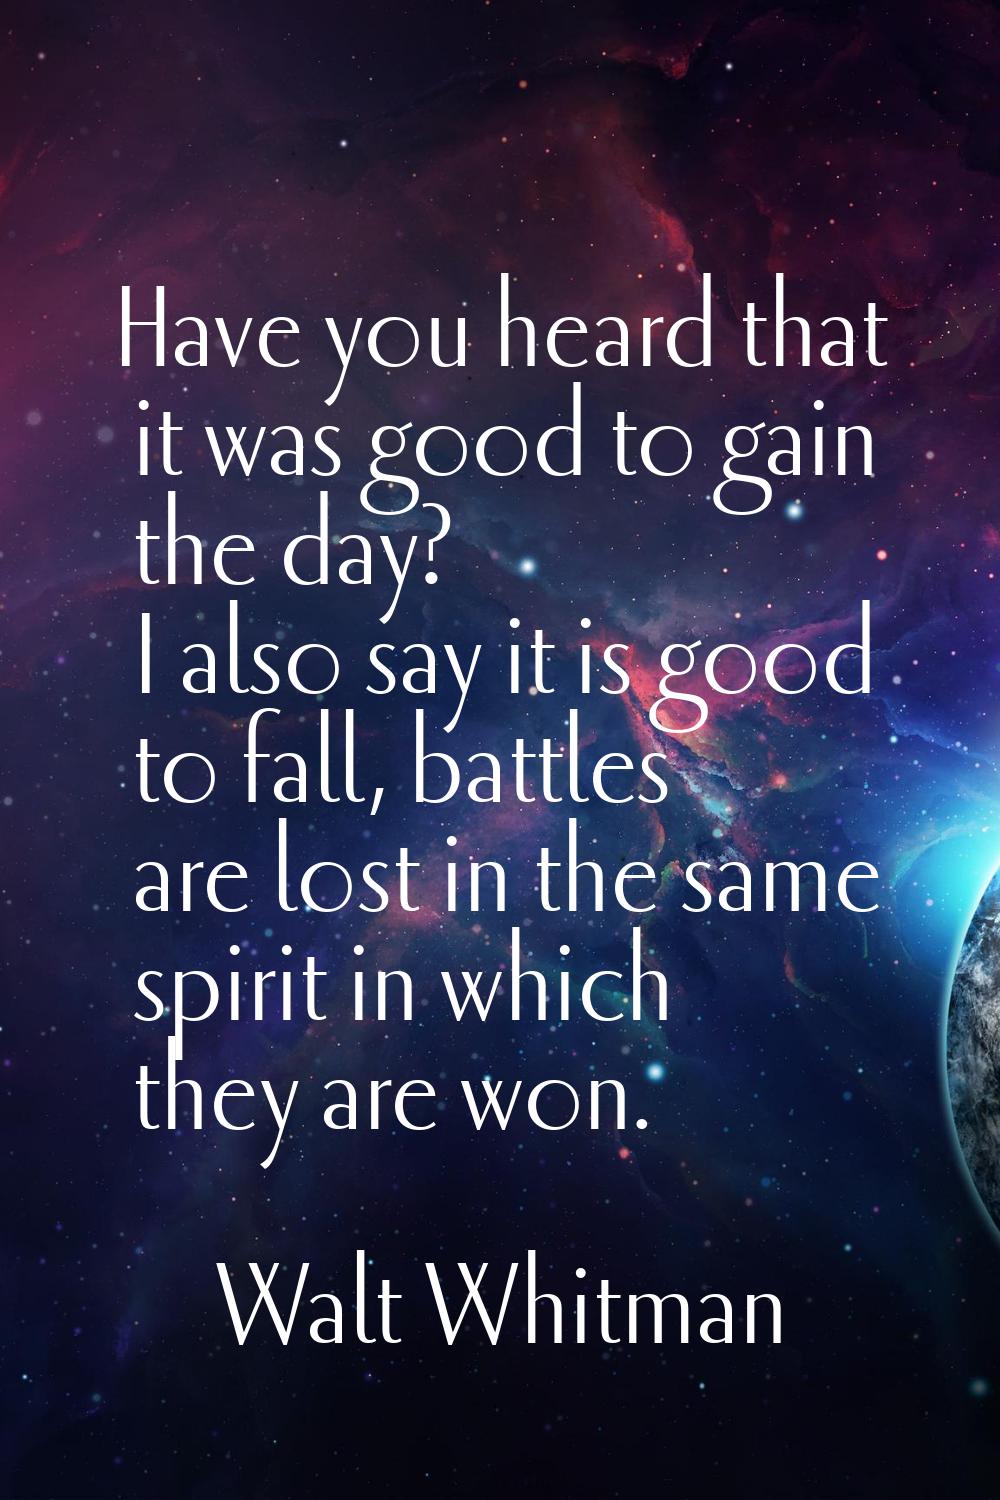 Have you heard that it was good to gain the day? I also say it is good to fall, battles are lost in